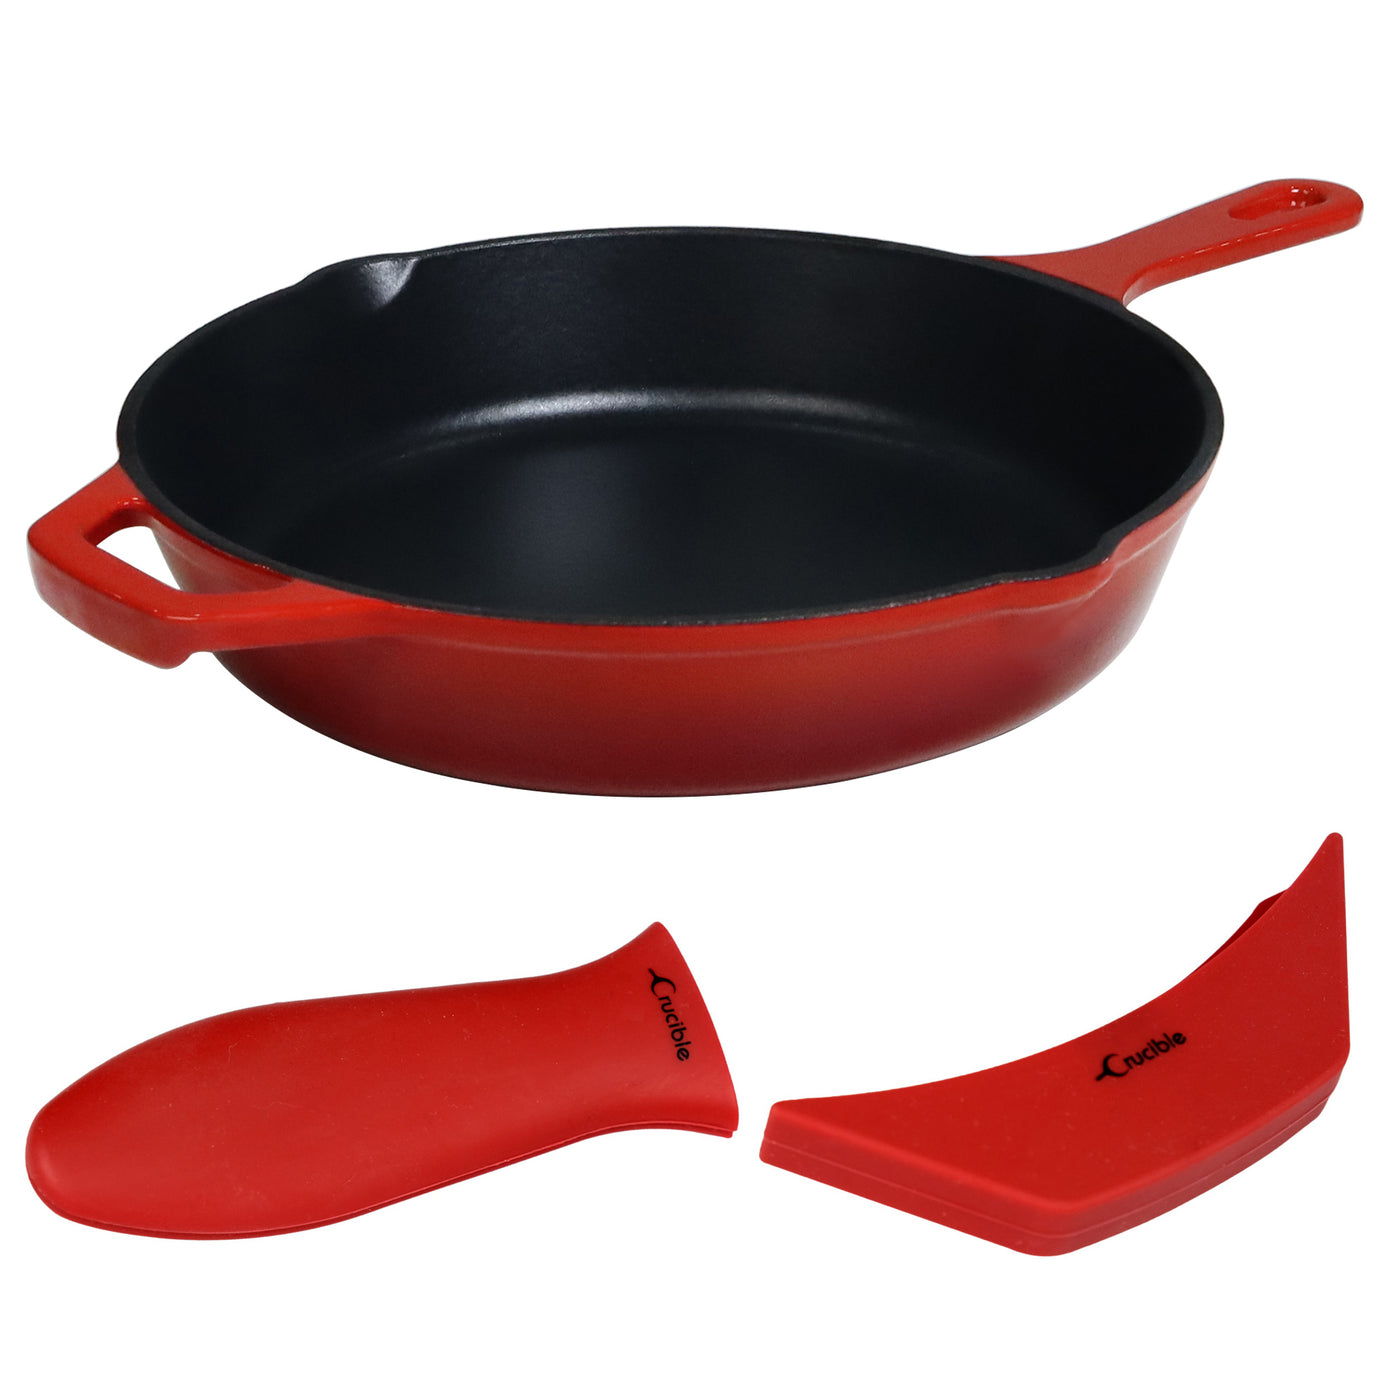 10.25"/26 cm Enameled Cast Iron Skillet Frying Pan + 2 Silicone Handle Covers